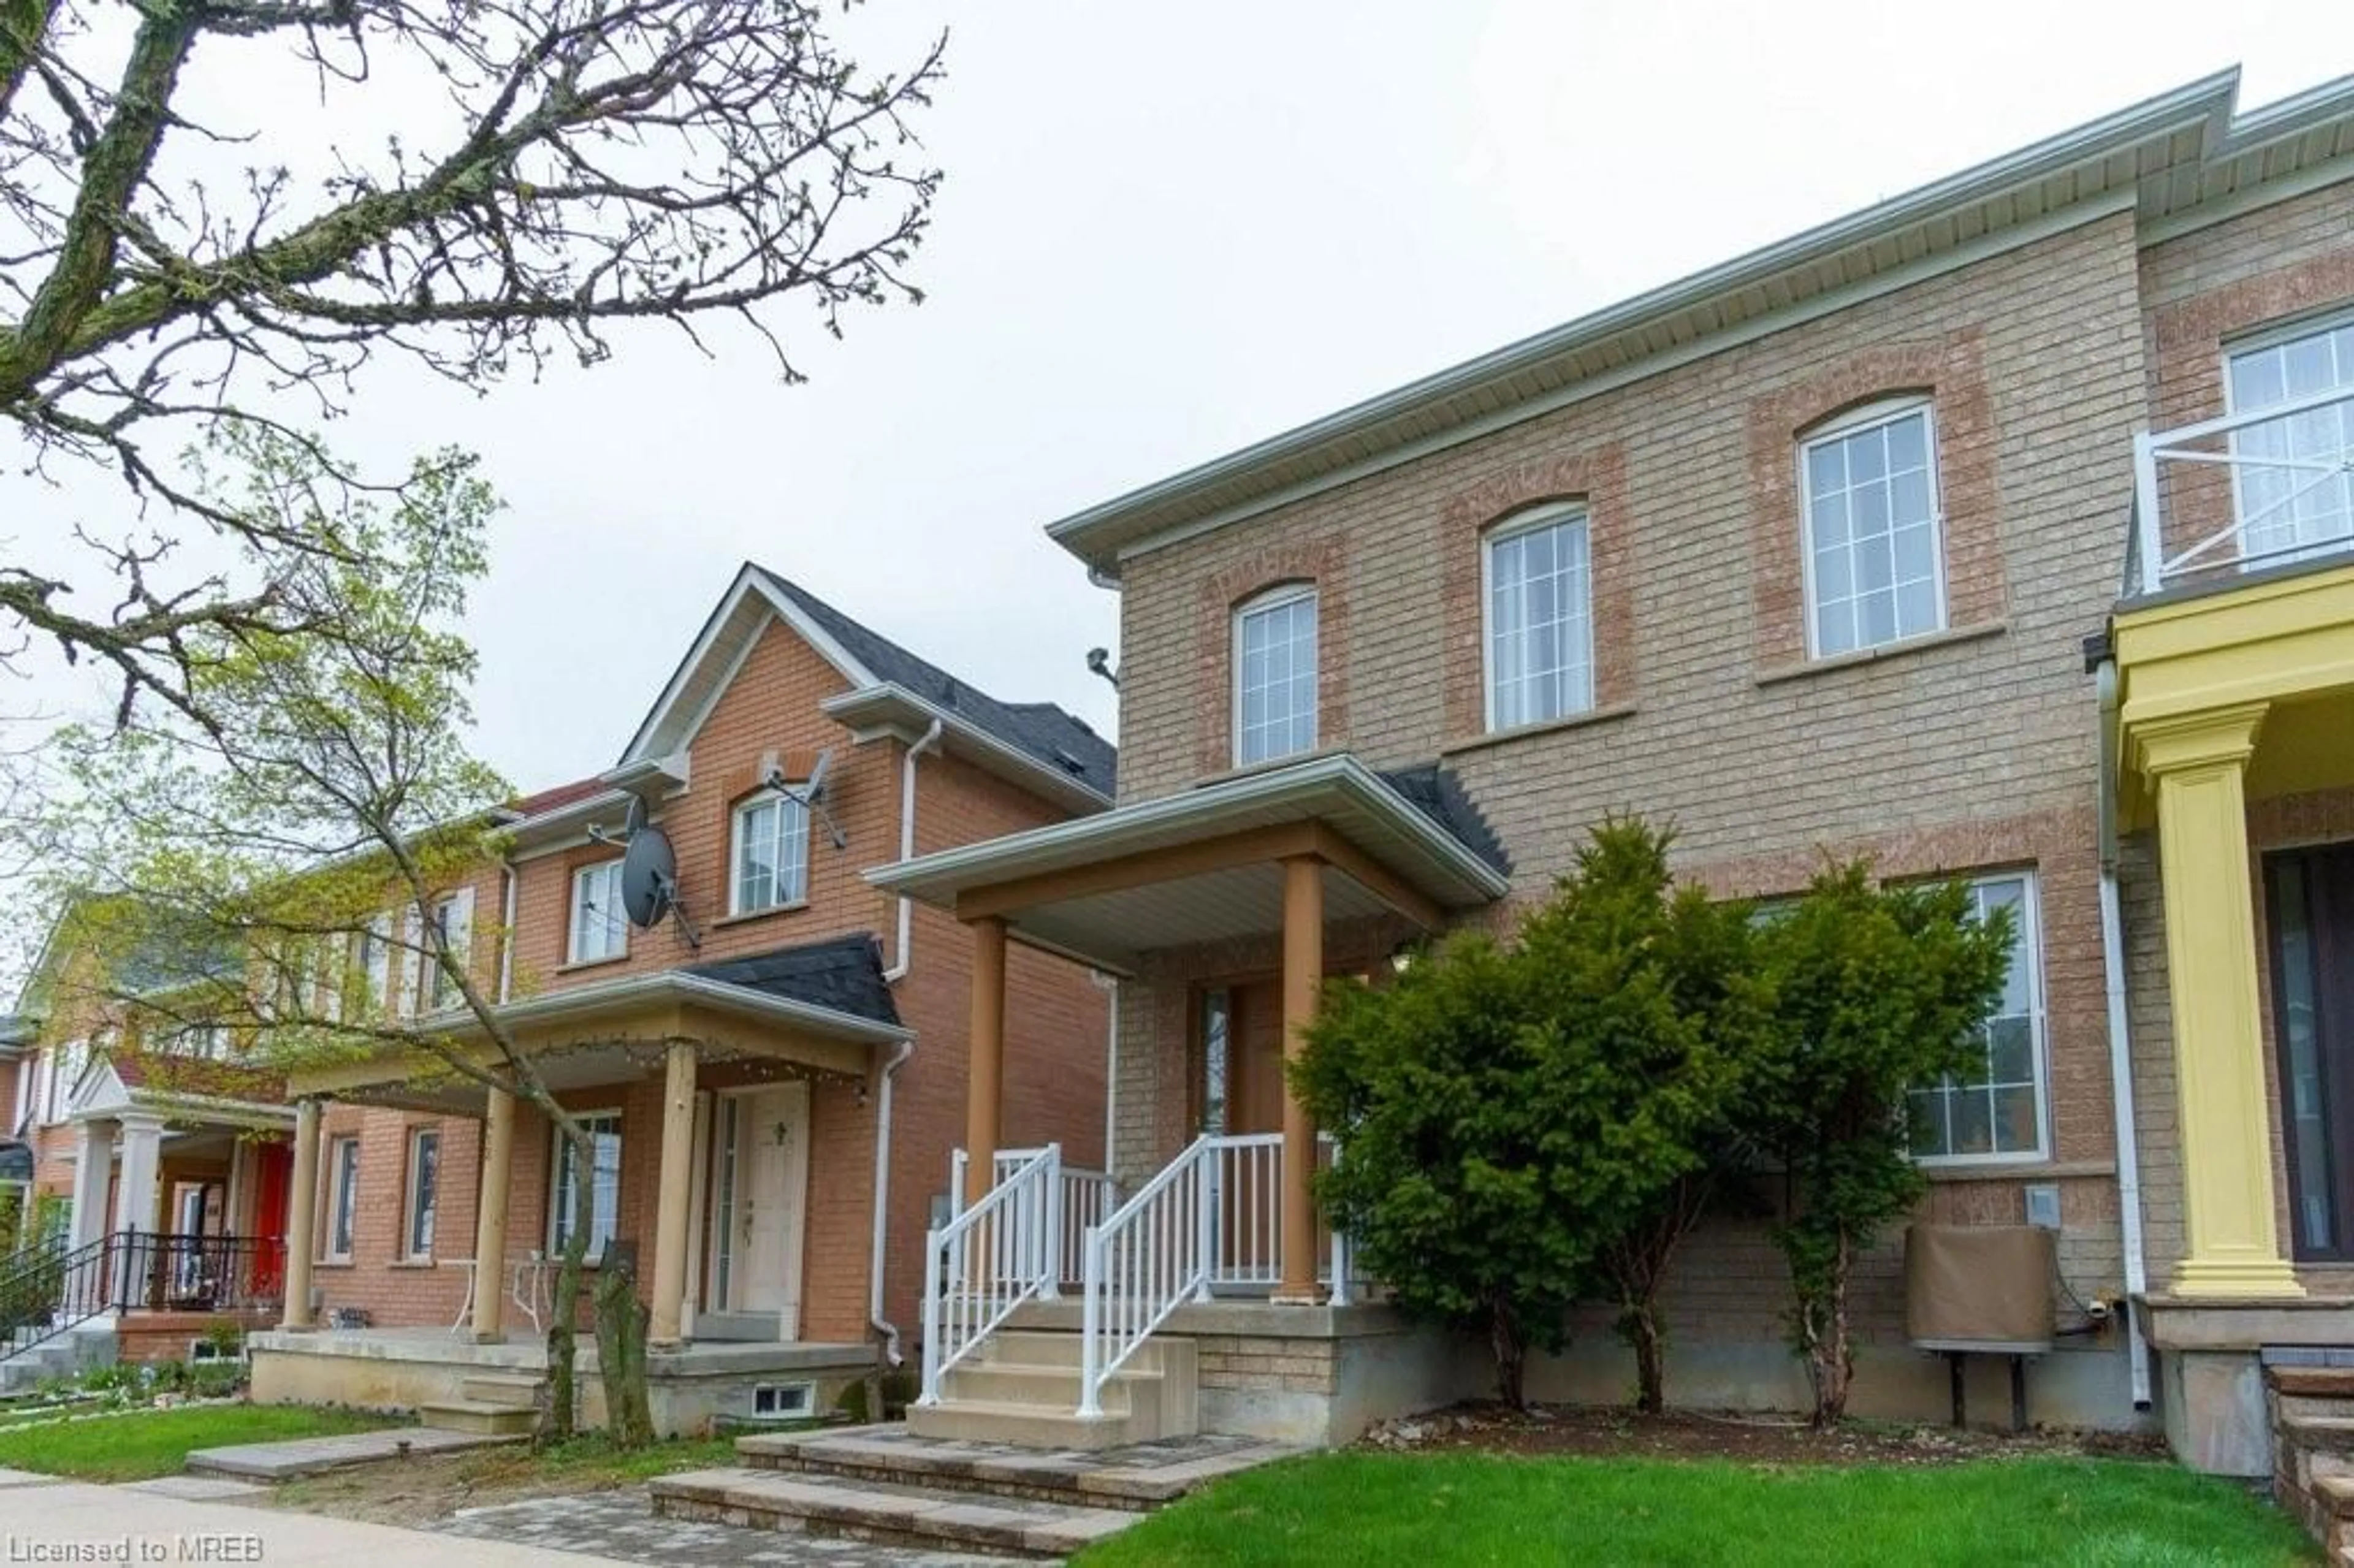 Home with brick exterior material for 616 Napa Valley Ave, Vaughan Ontario L4H 1R1